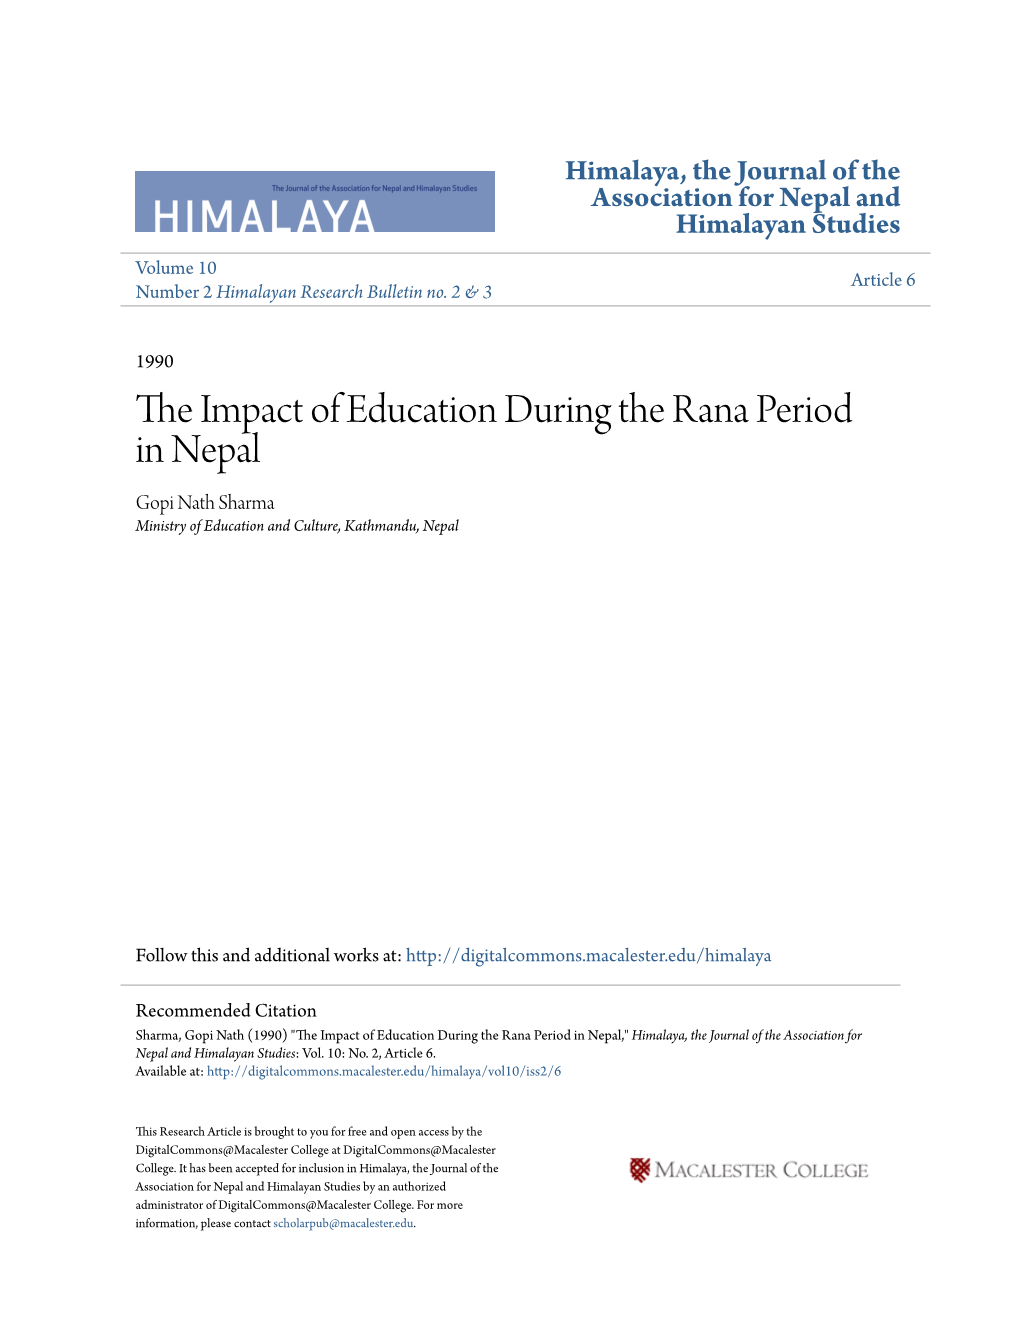 The Impact of Education During the Rana Period in Nepal